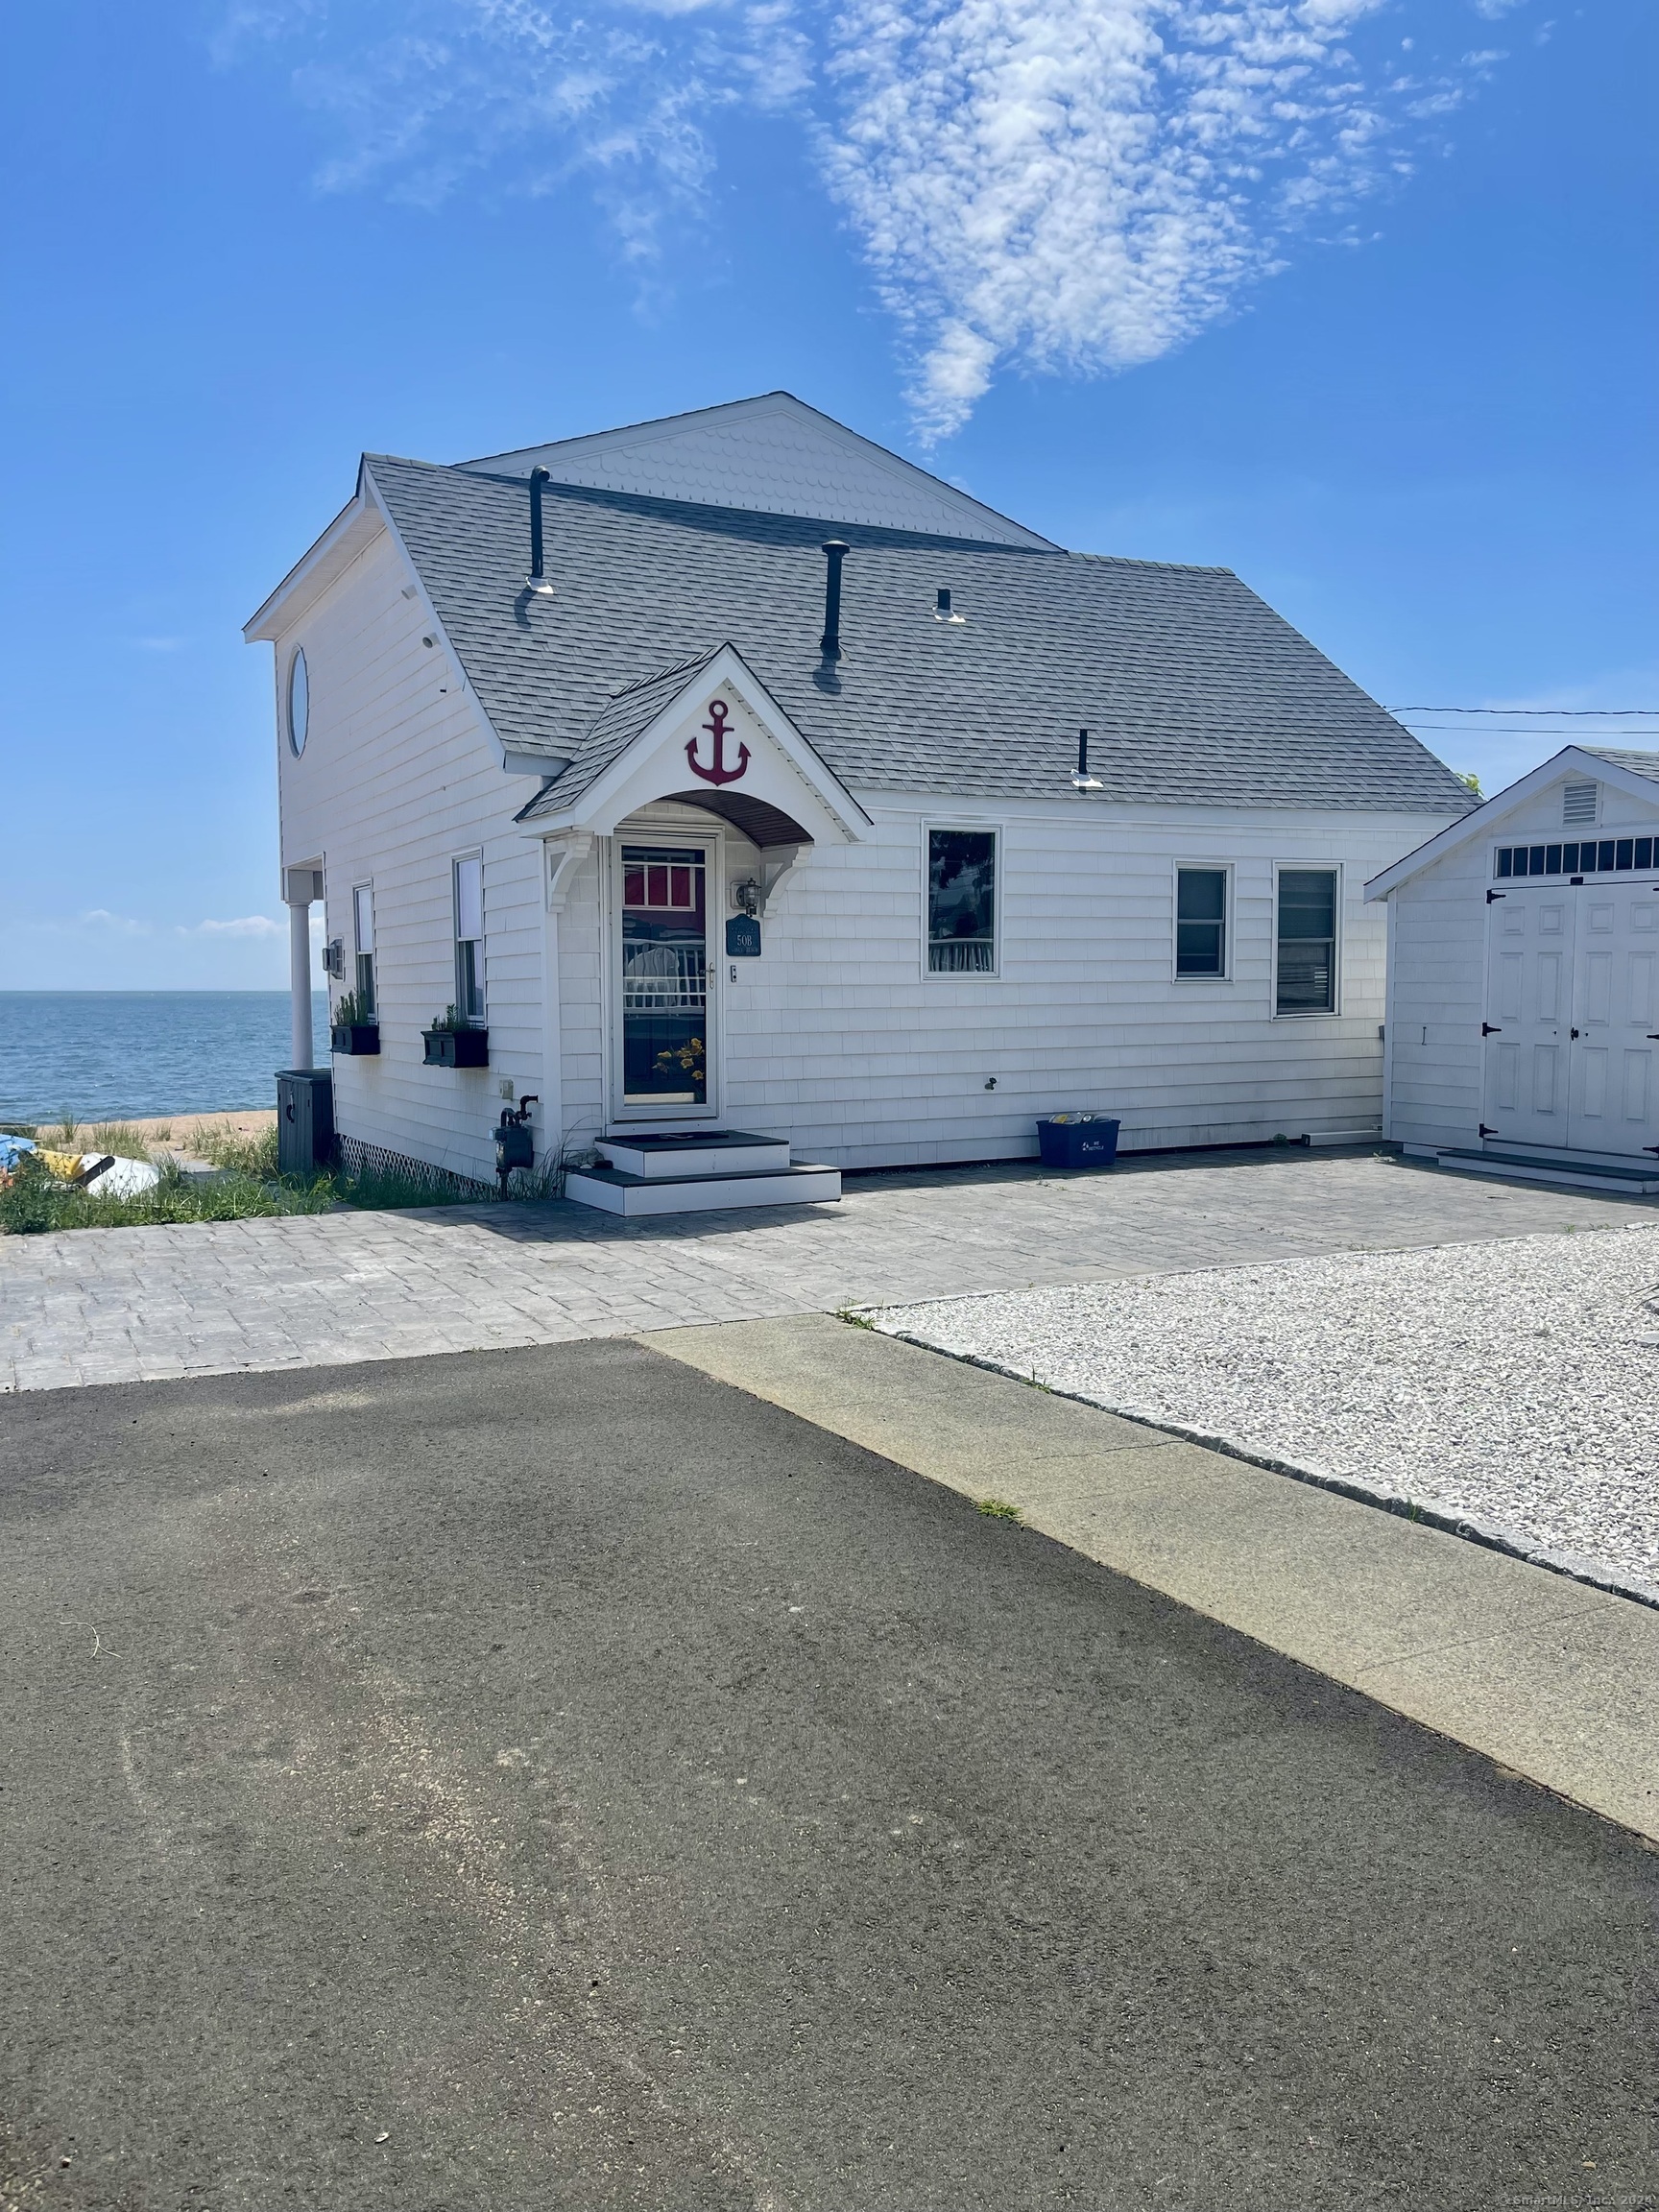 Rental Property at 50 Cosey Beach Avenue, East Haven, Connecticut - Bedrooms: 3 
Bathrooms: 2 
Rooms: 6  - $3,200 MO.